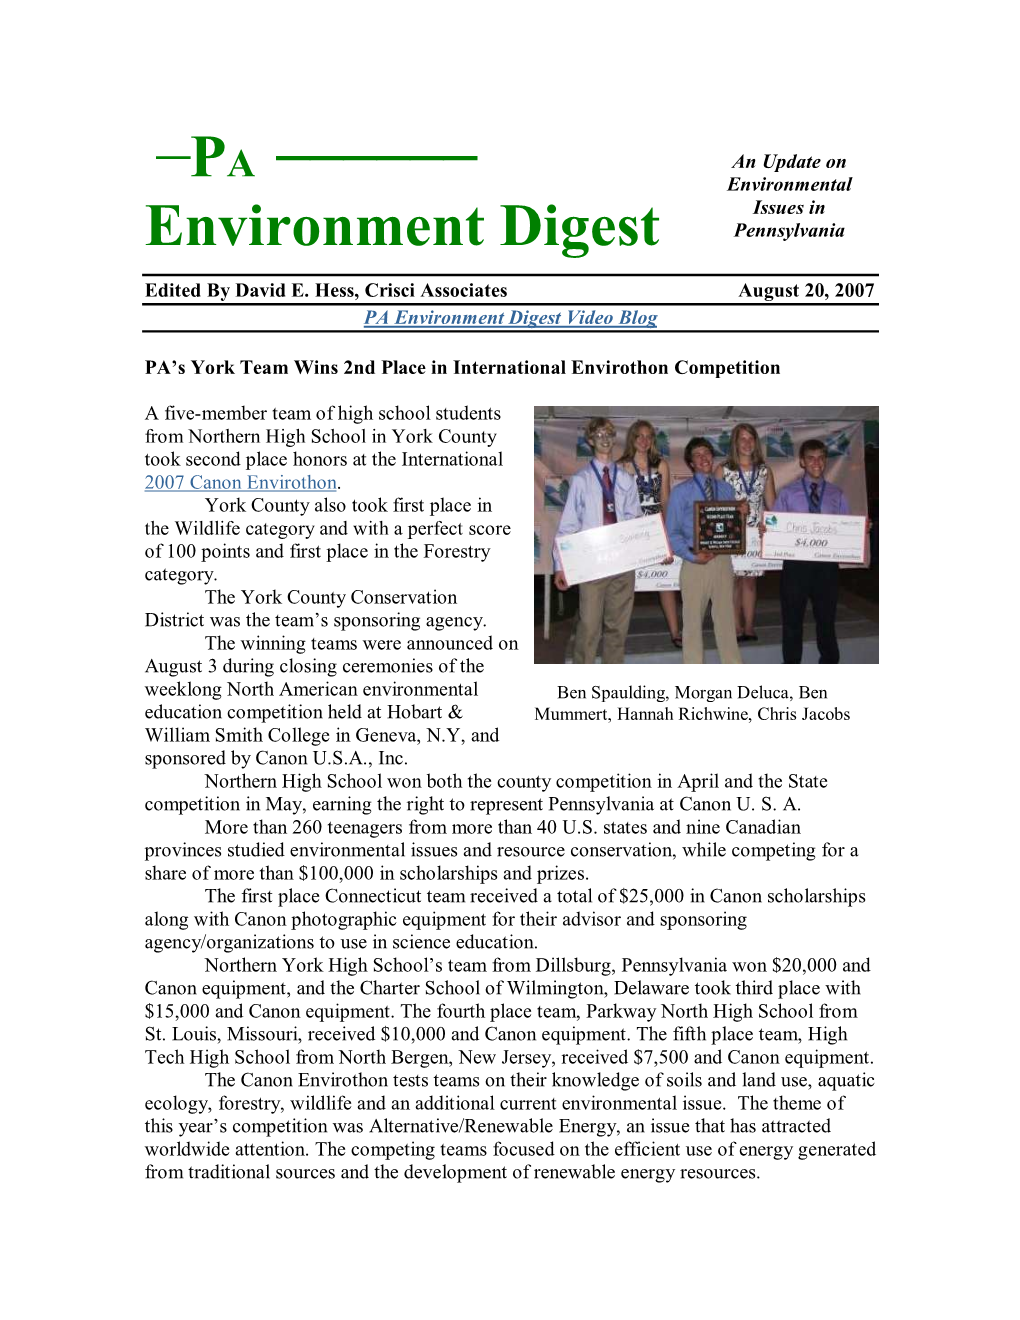 PA Environment Digest 8/20/07